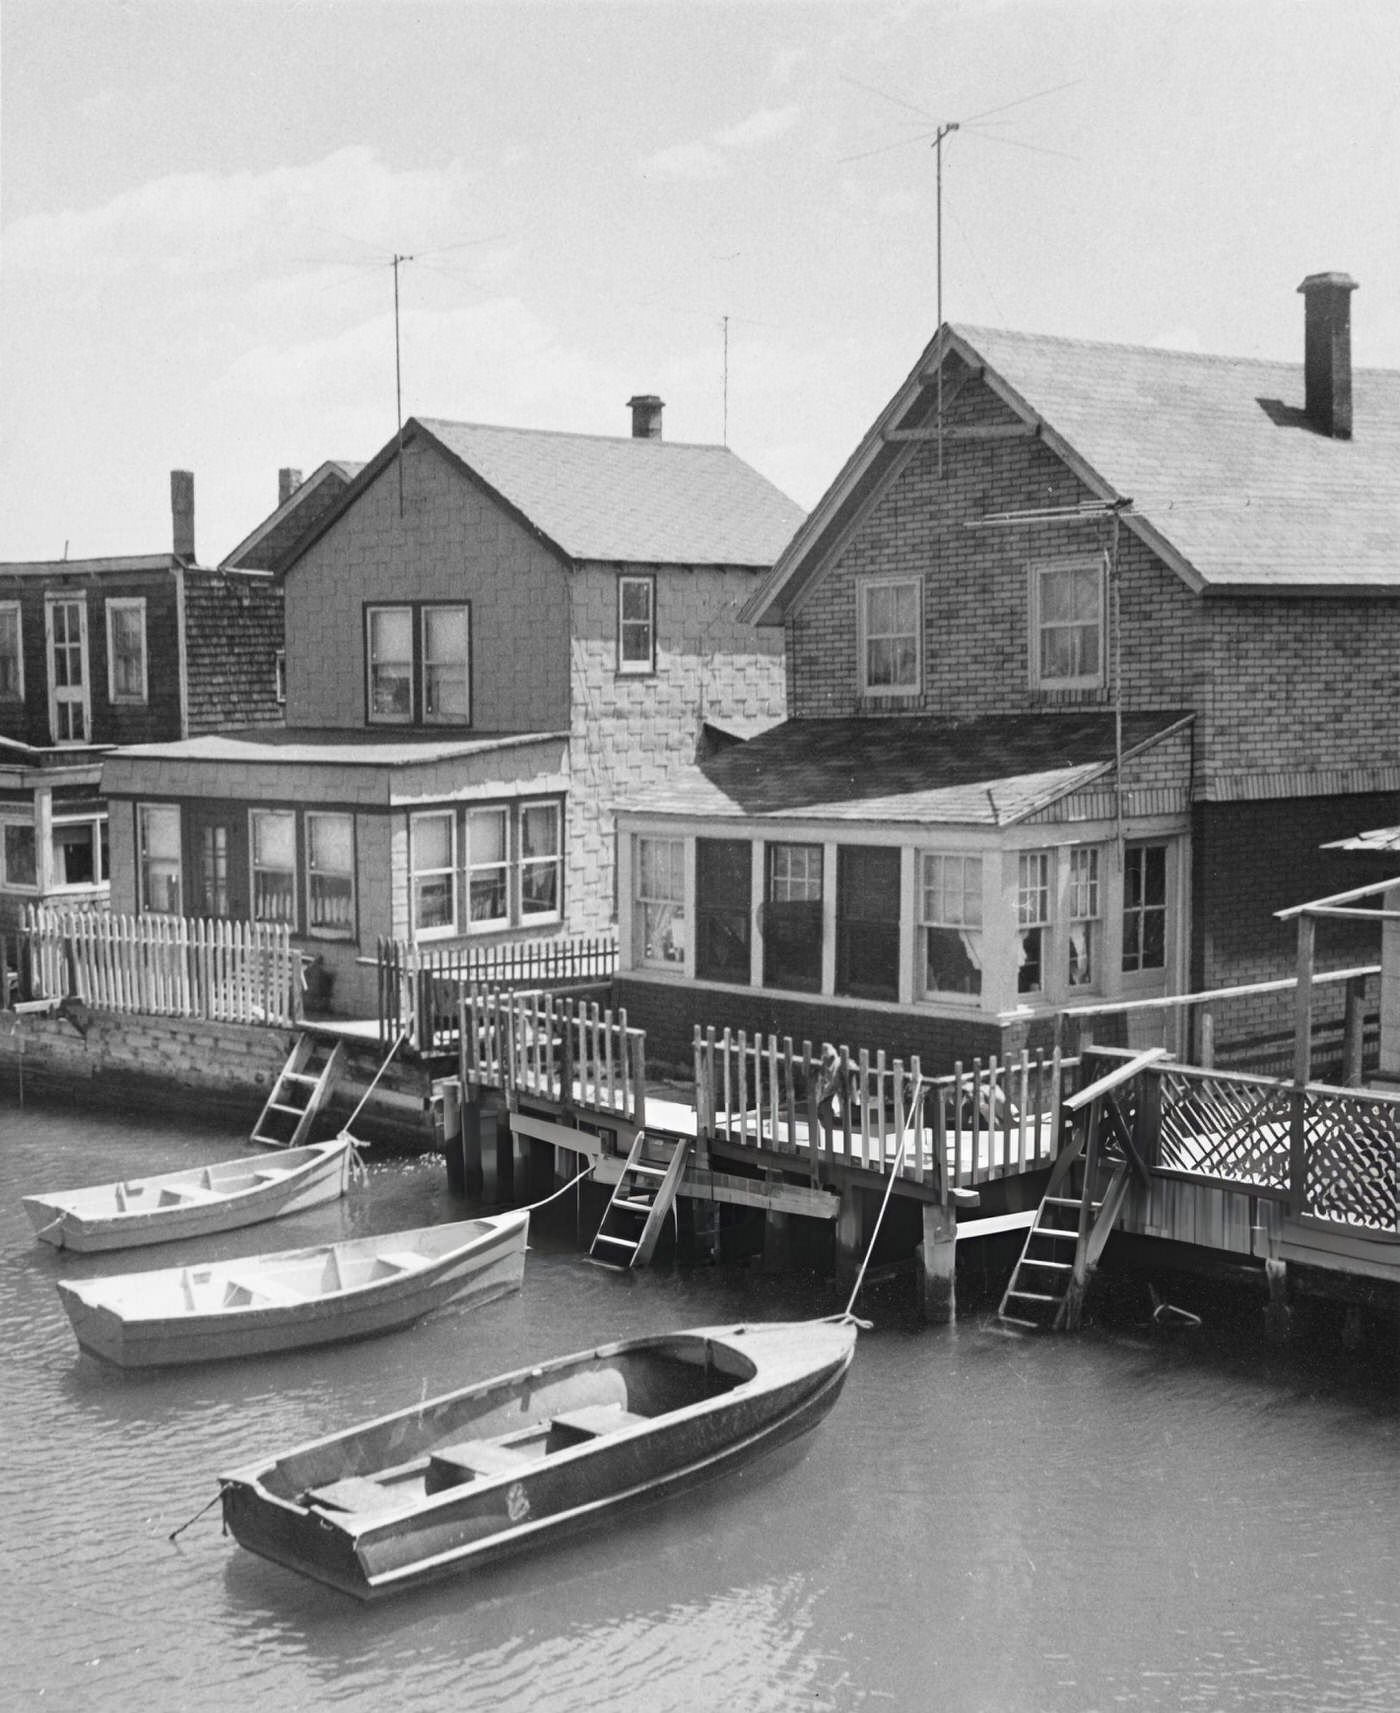 Three Rowboats Tethered To The Rear Of Houses In Ramblersville, Howard Beach, Queens, New York City, 1950S.